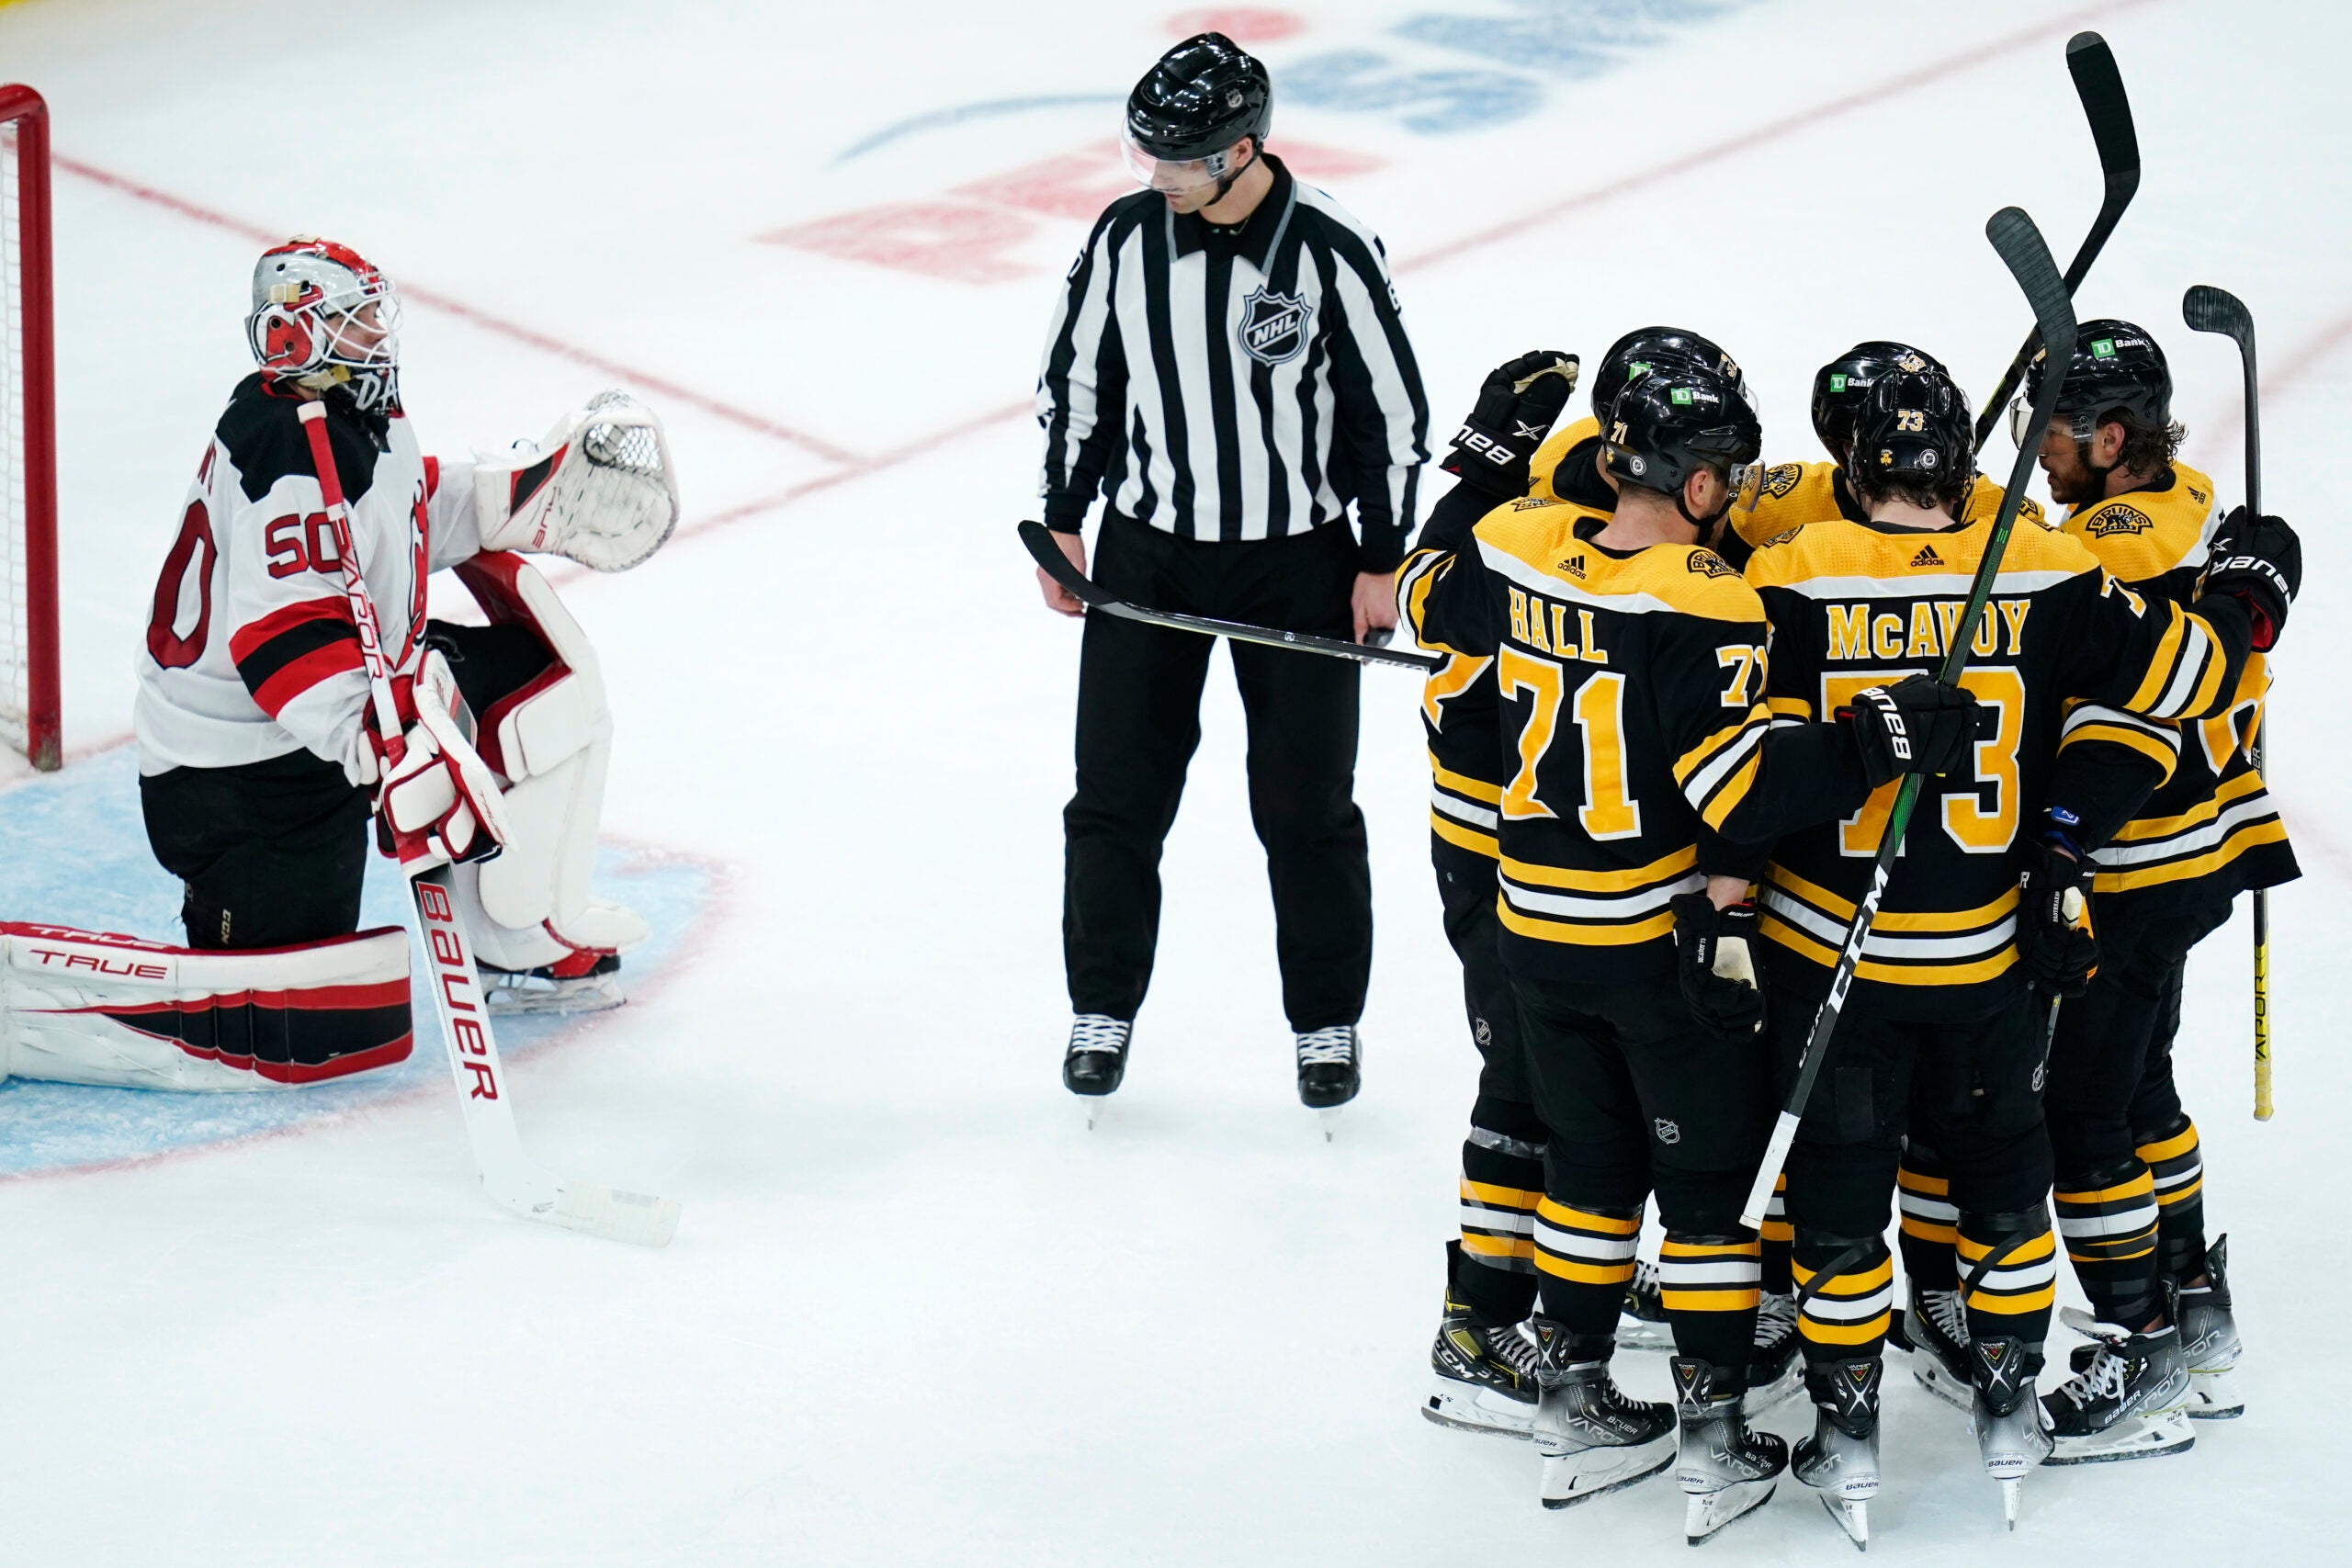 Bruins bust out for 81 victory over Devils as Rask is honored